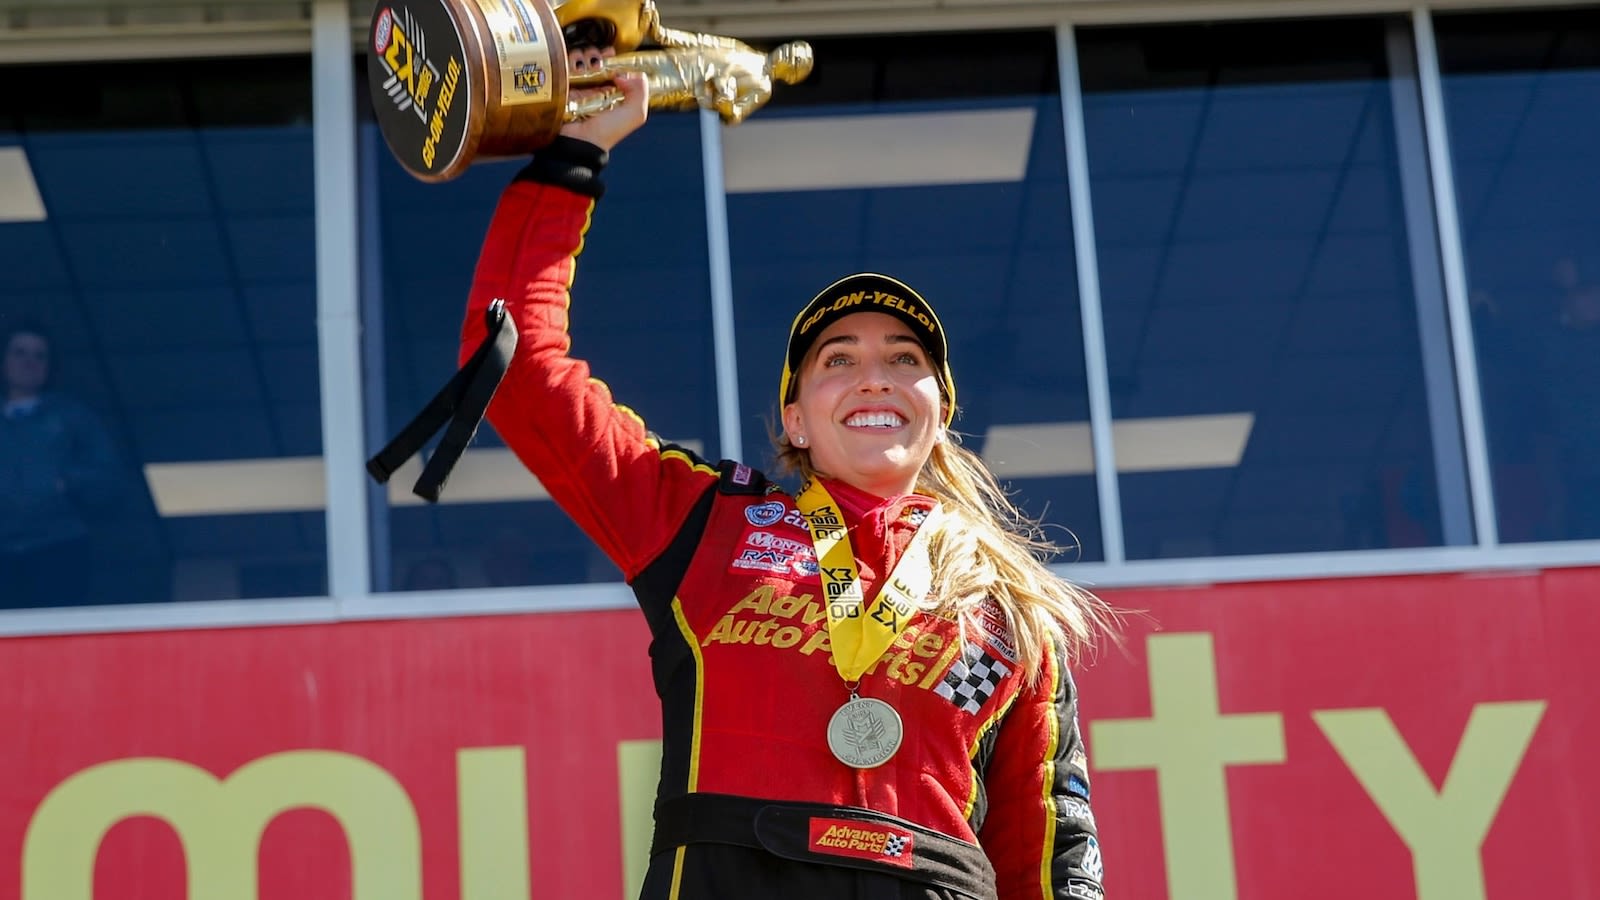 Brittany Force will return to Top Fuel racing for first time since her dad's accident